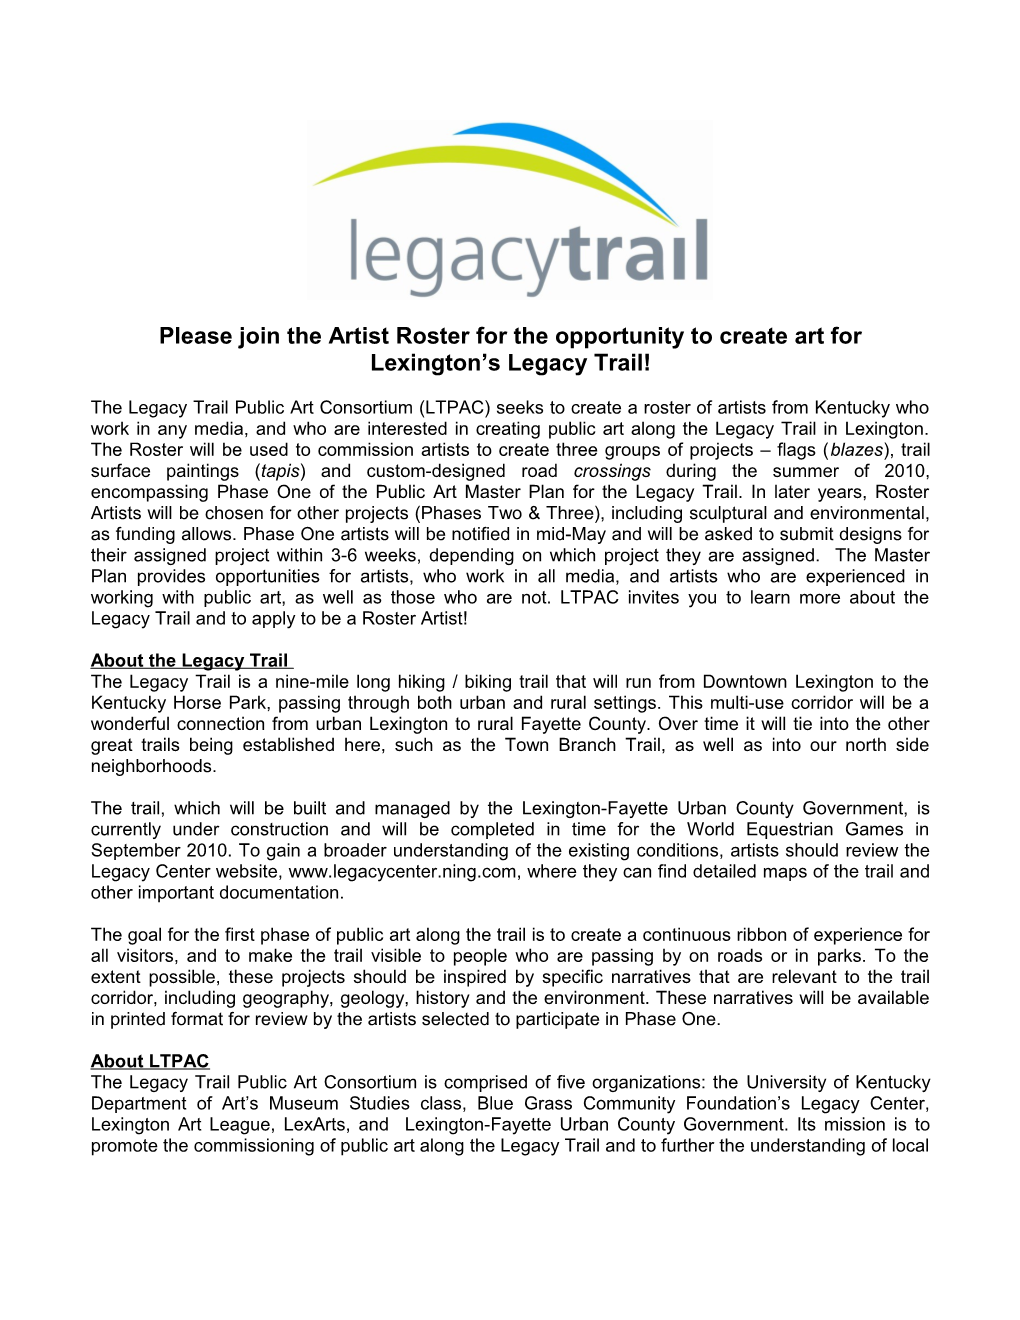 Please Join the Artist Roster for the Opportunity to Create Art for Lexington S Legacy Trail!